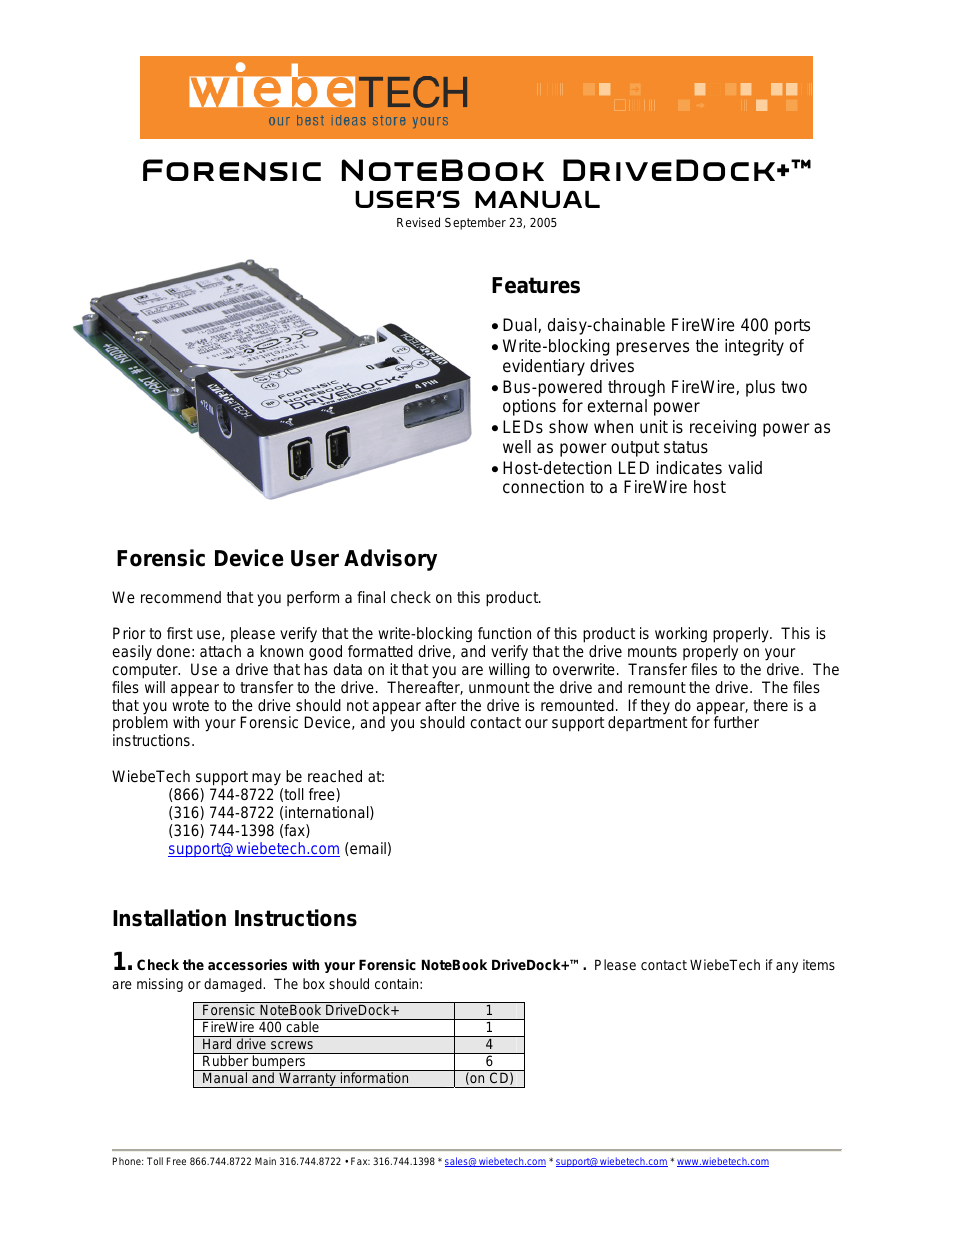 Forensic Notebook DriveDock